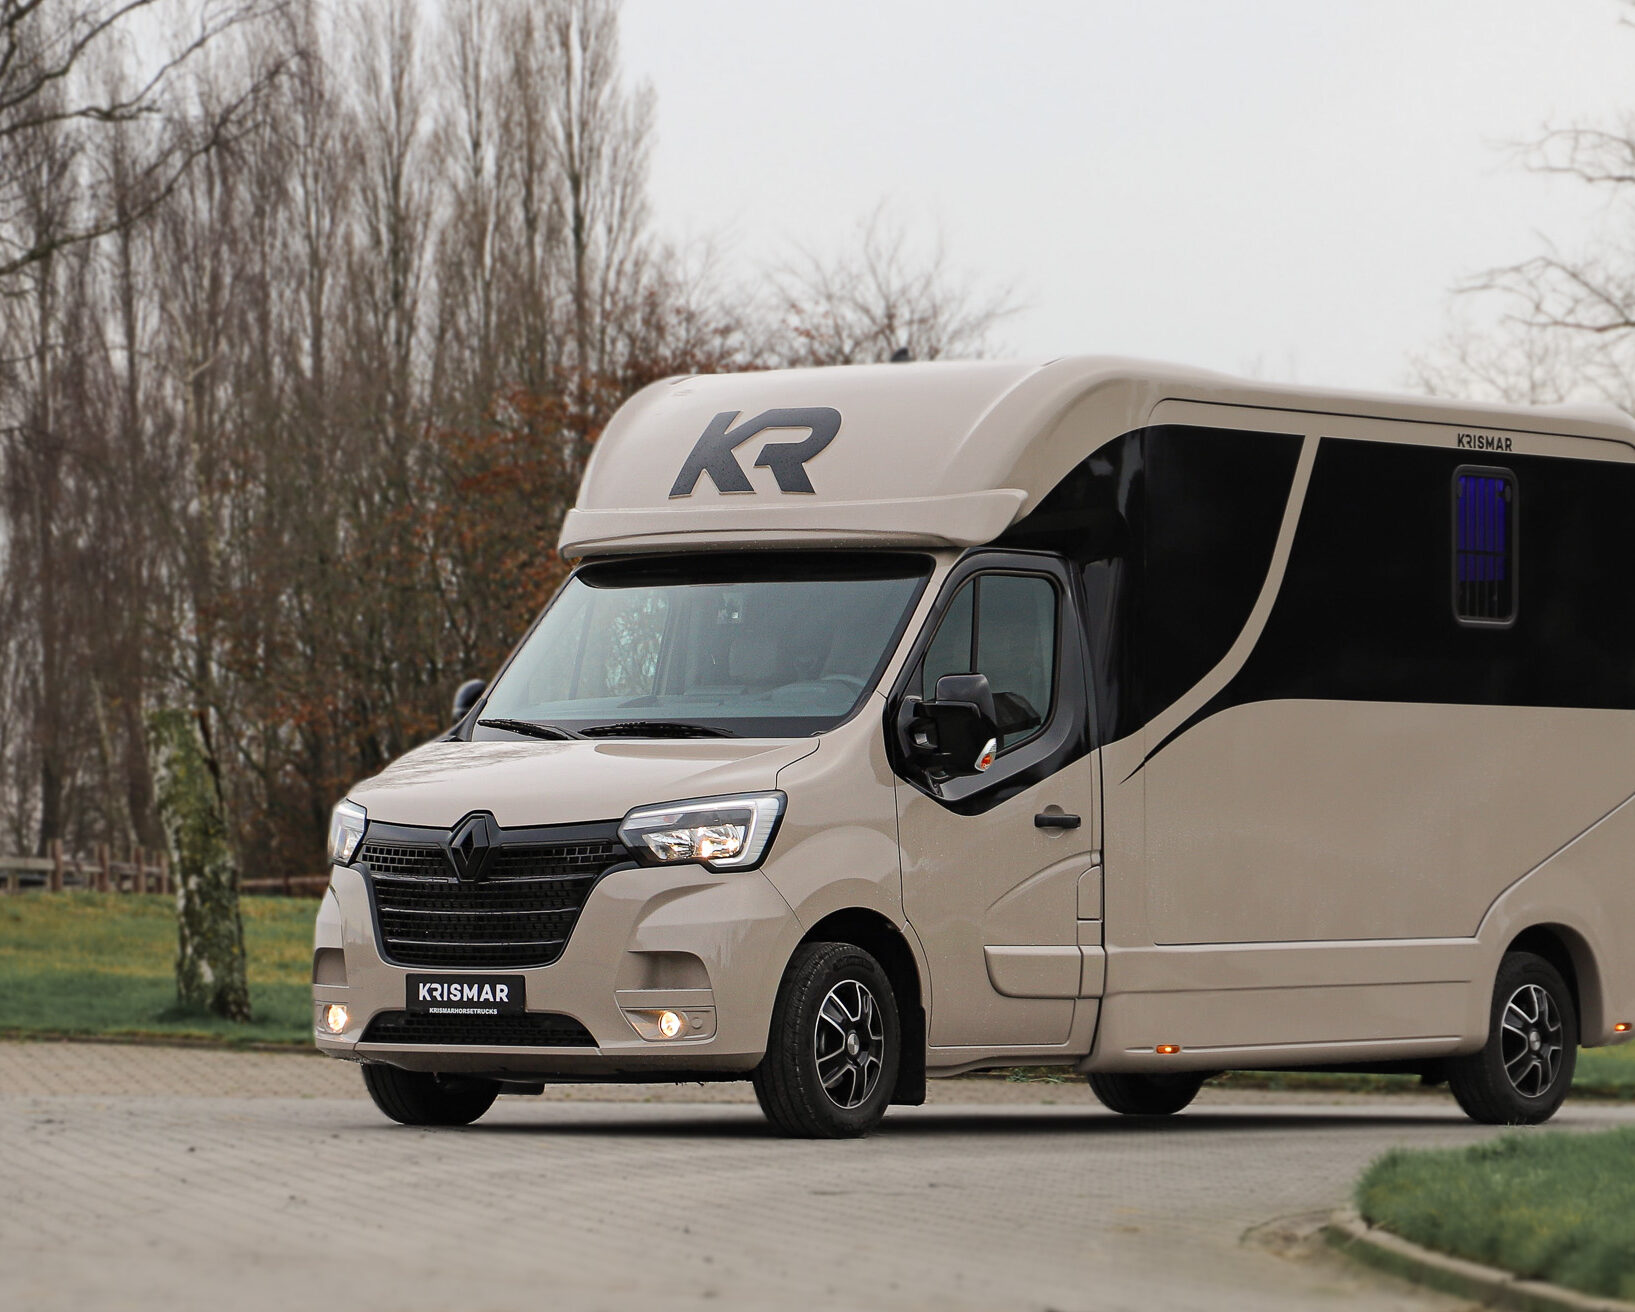 Side view of a gold Krismar 2-horse van with the unmistakable black optical Krismar line.